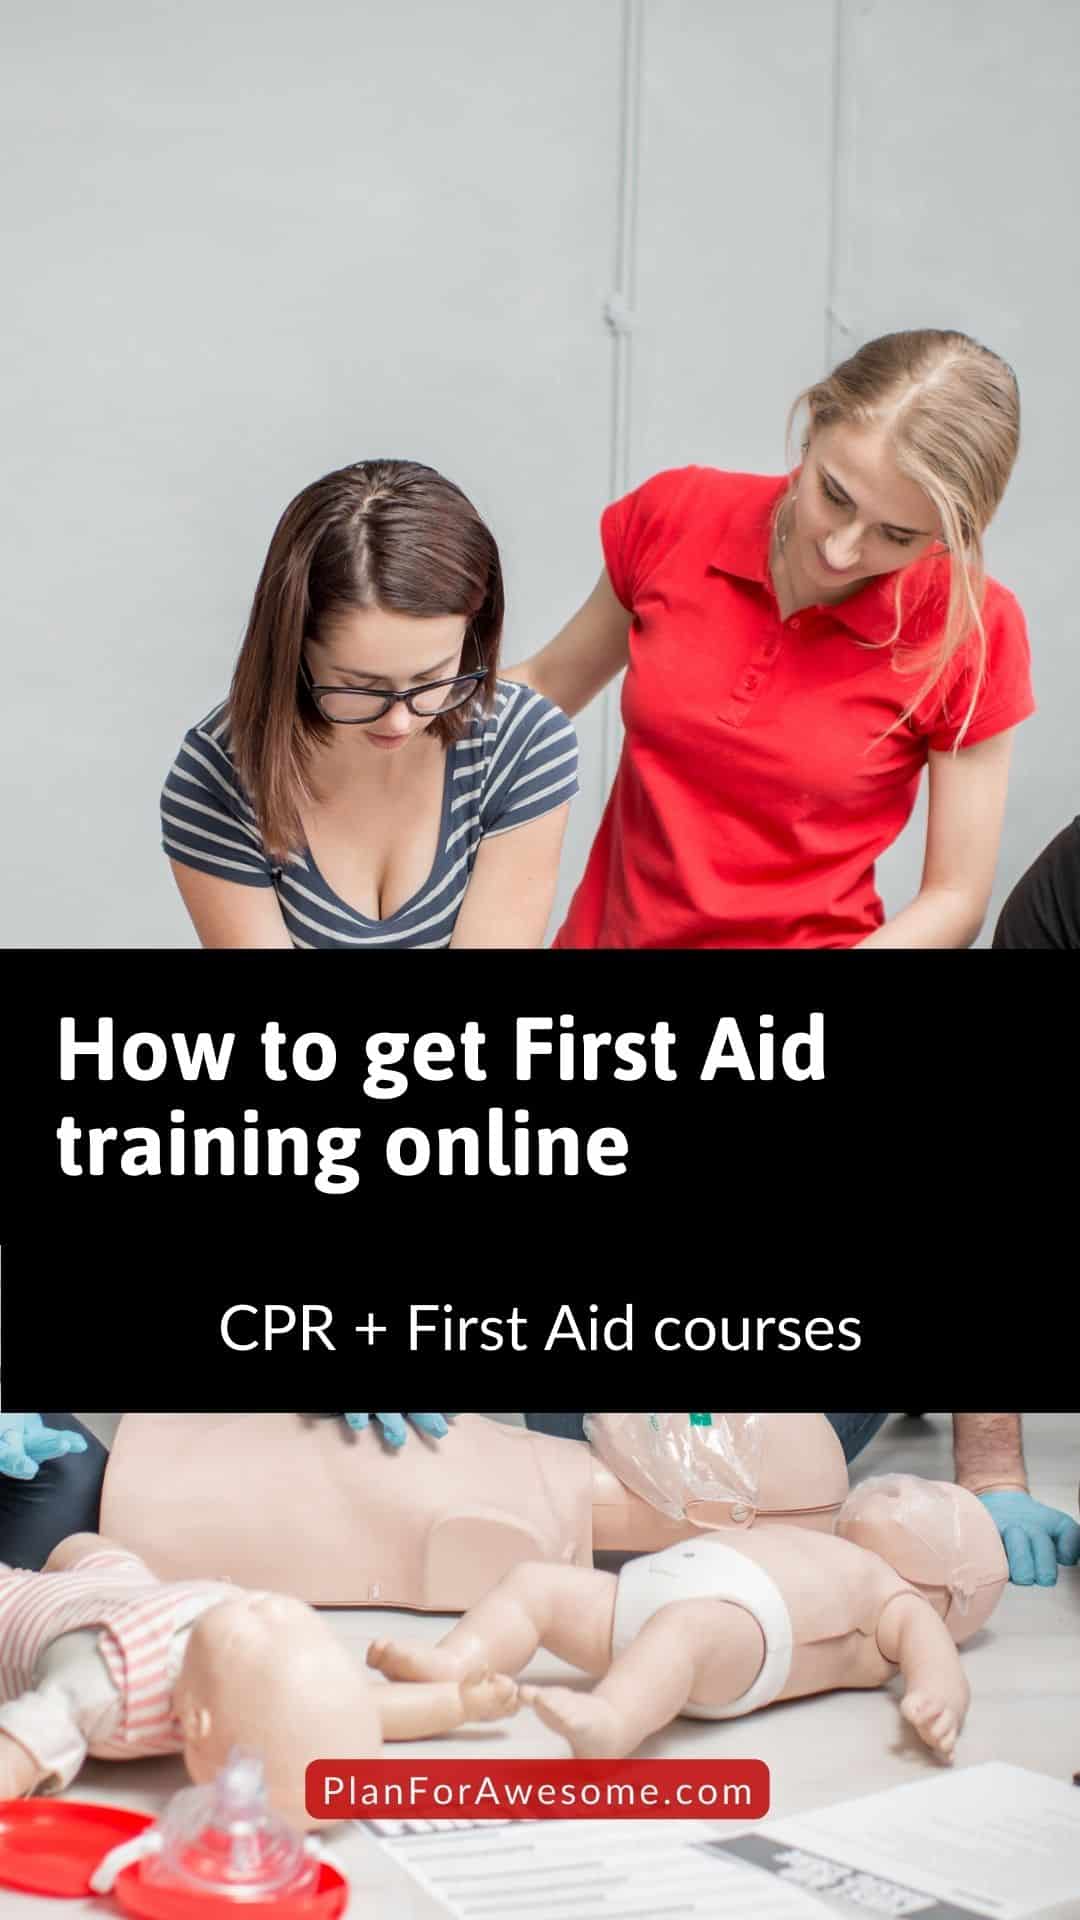 Why I love this legit online CPR Course